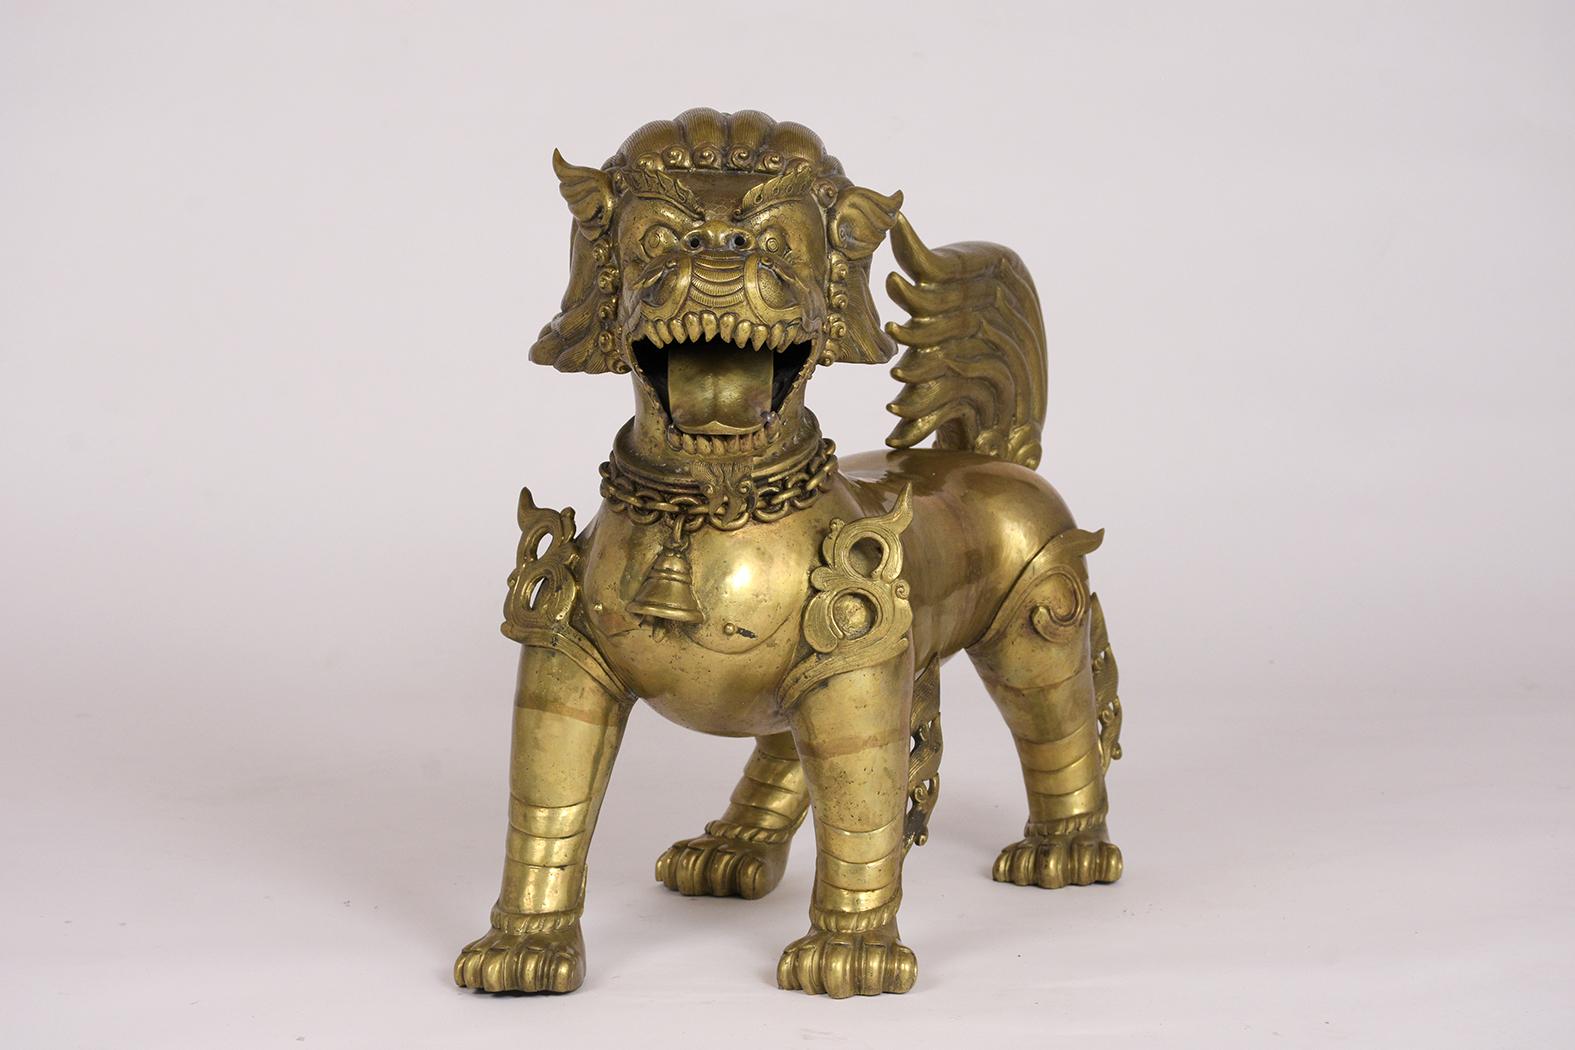 Polished Pair of Chinese Standing Foo Dogs